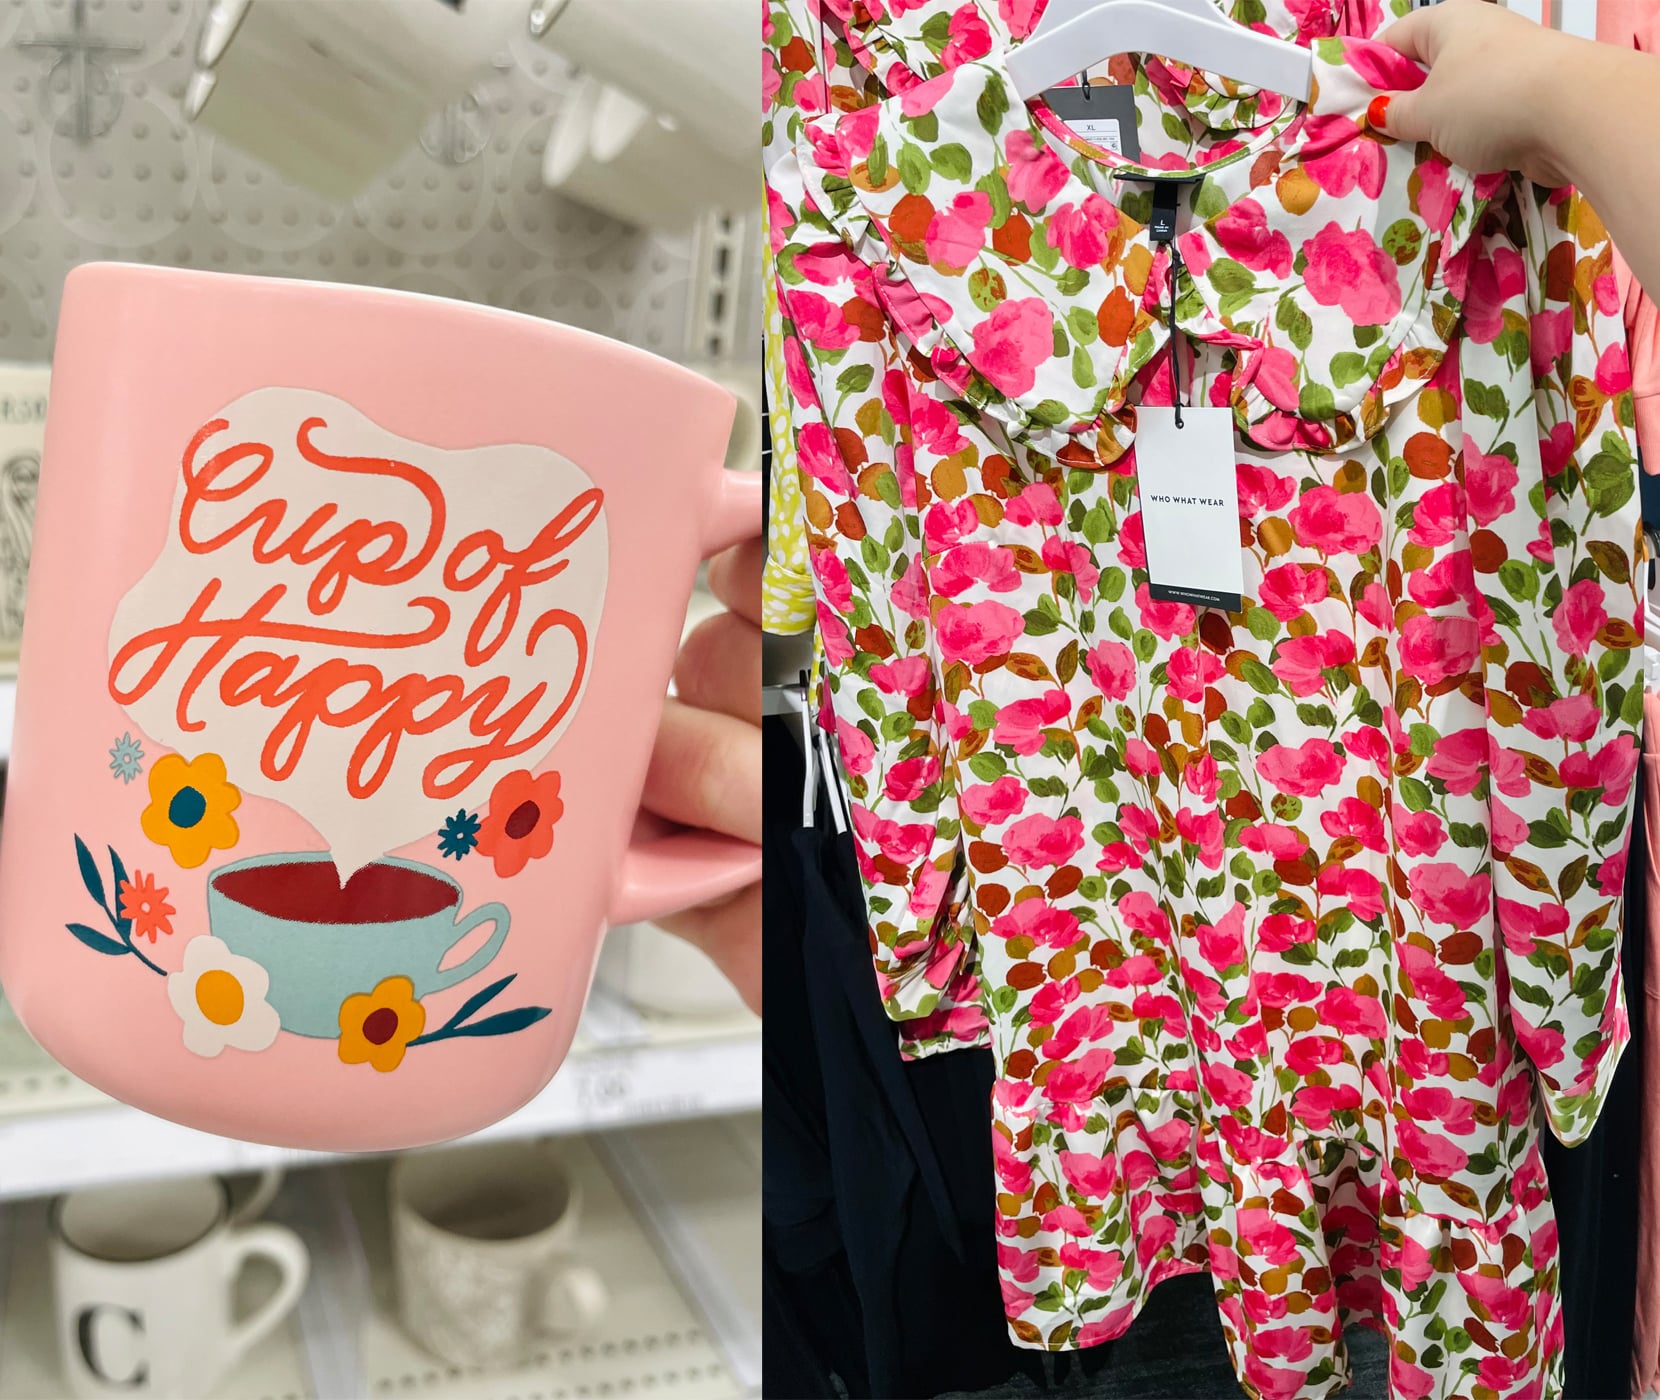 Target's $5 Heart-Shaped Mug Shoppers Are Buying 2 at a Time